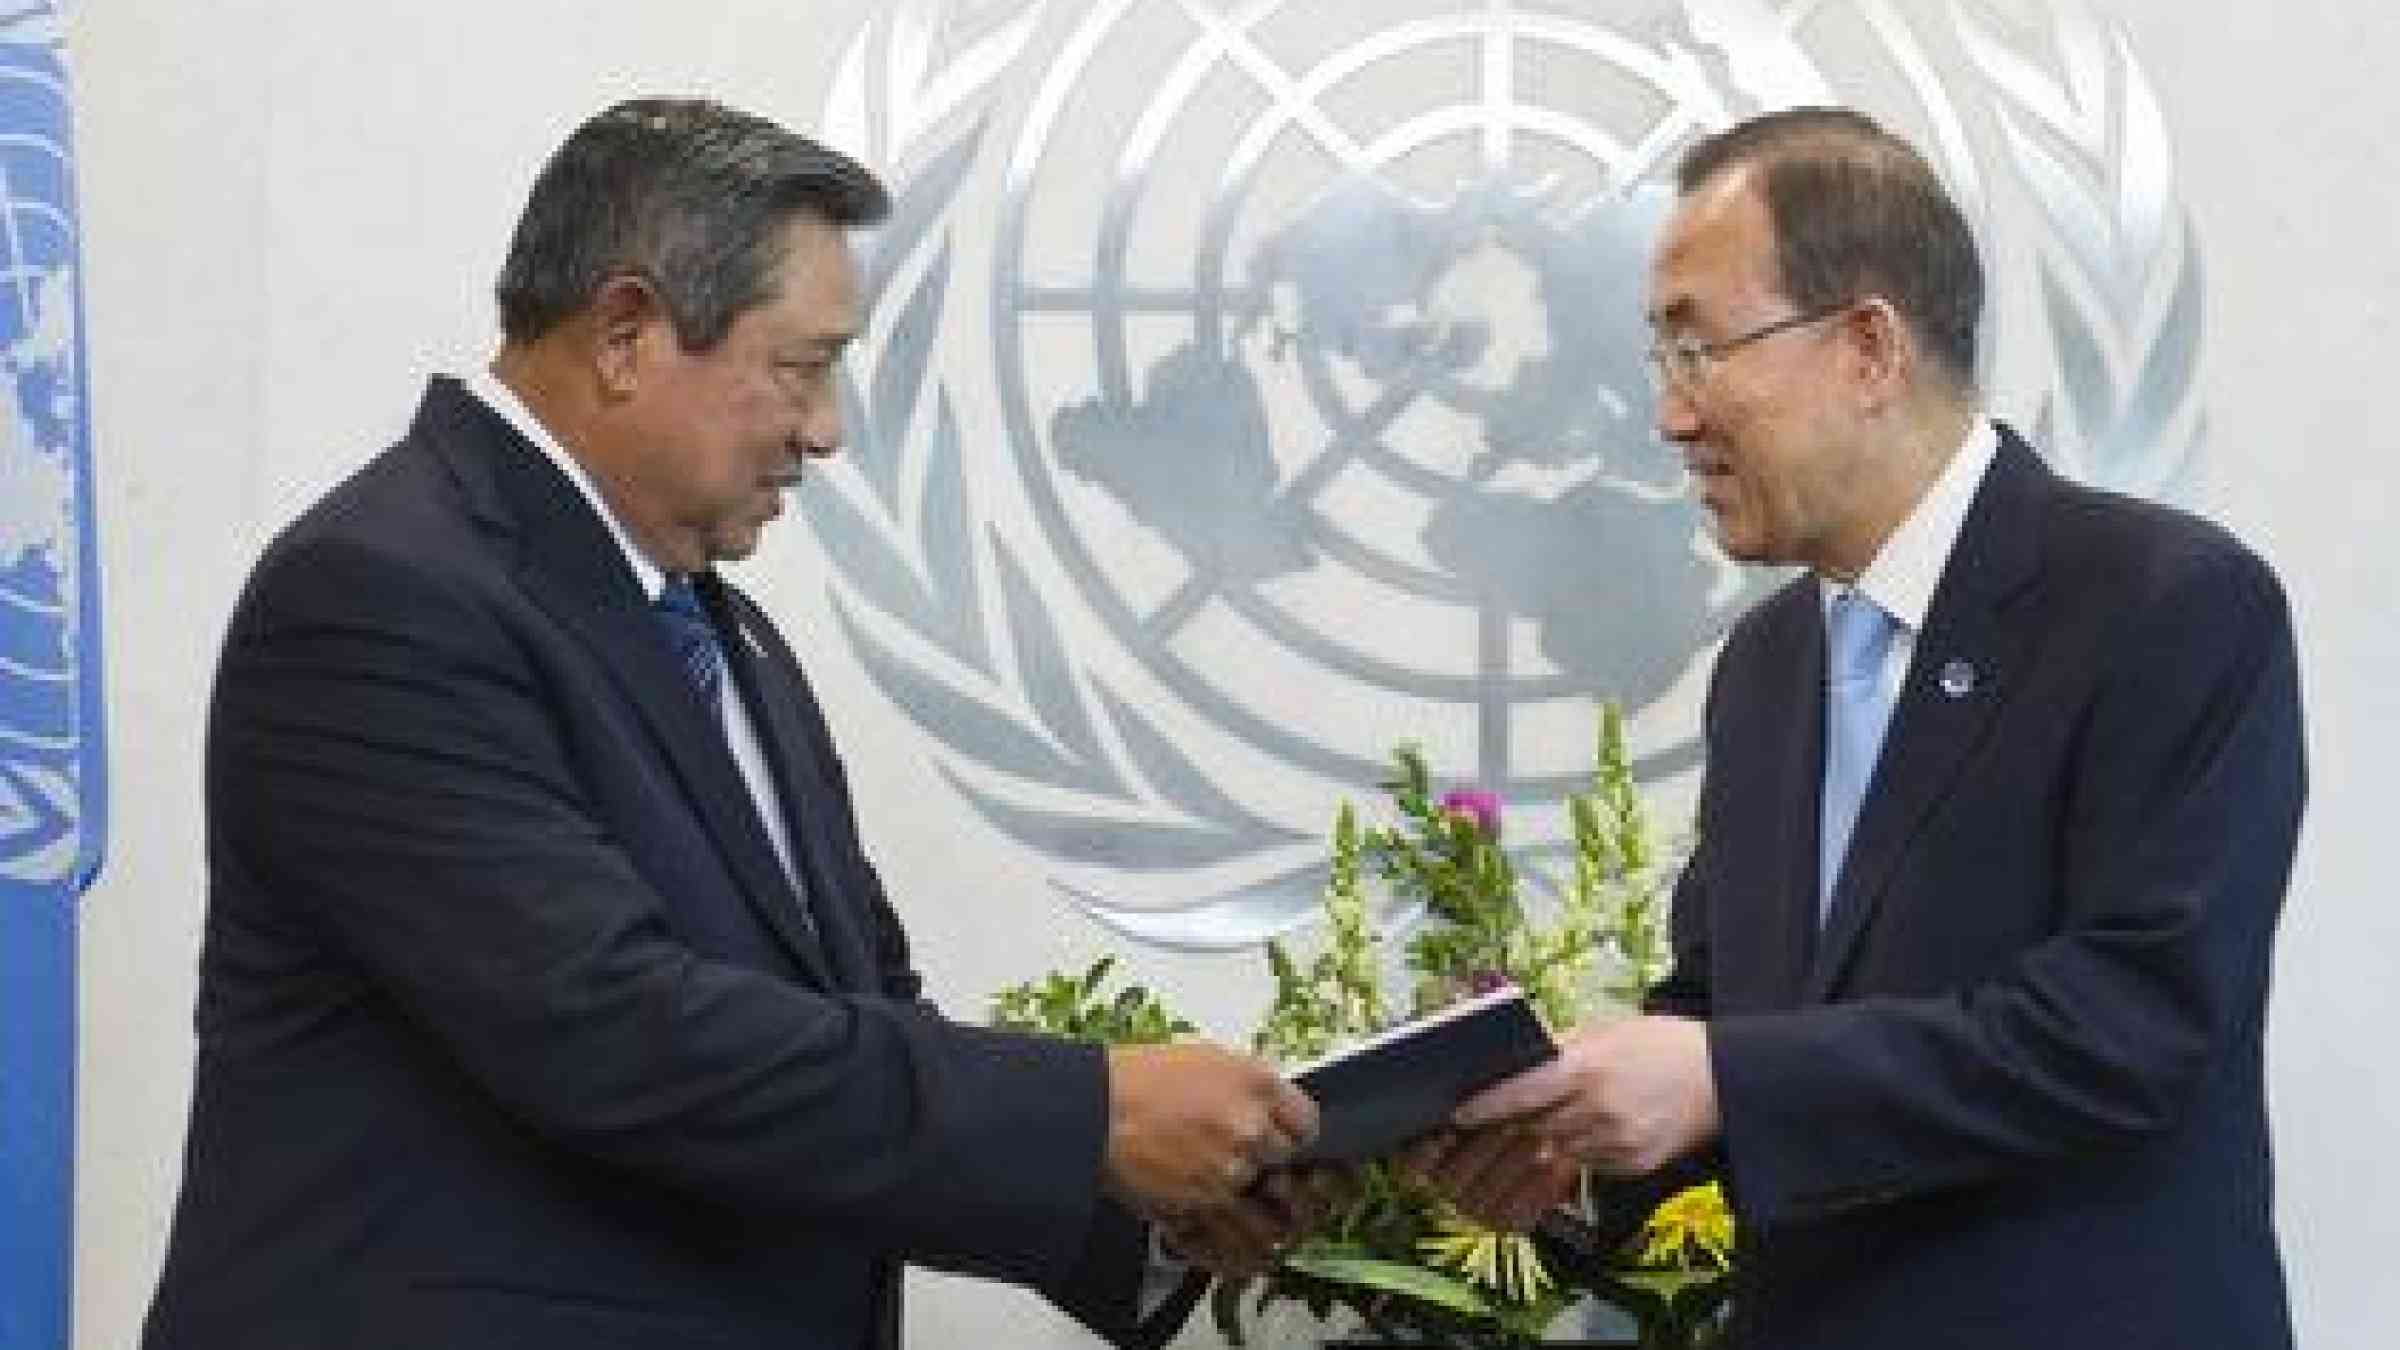 Susilo Bambang Yudhoyono (left), President of the Republic of Indonesia and Co-Chair of the Secretary-General’s High-Level Panel of Eminent Persons on the Post-2015 Development Agenda, presents the Panel’s report to Secretary-General Ban Ki-moon.